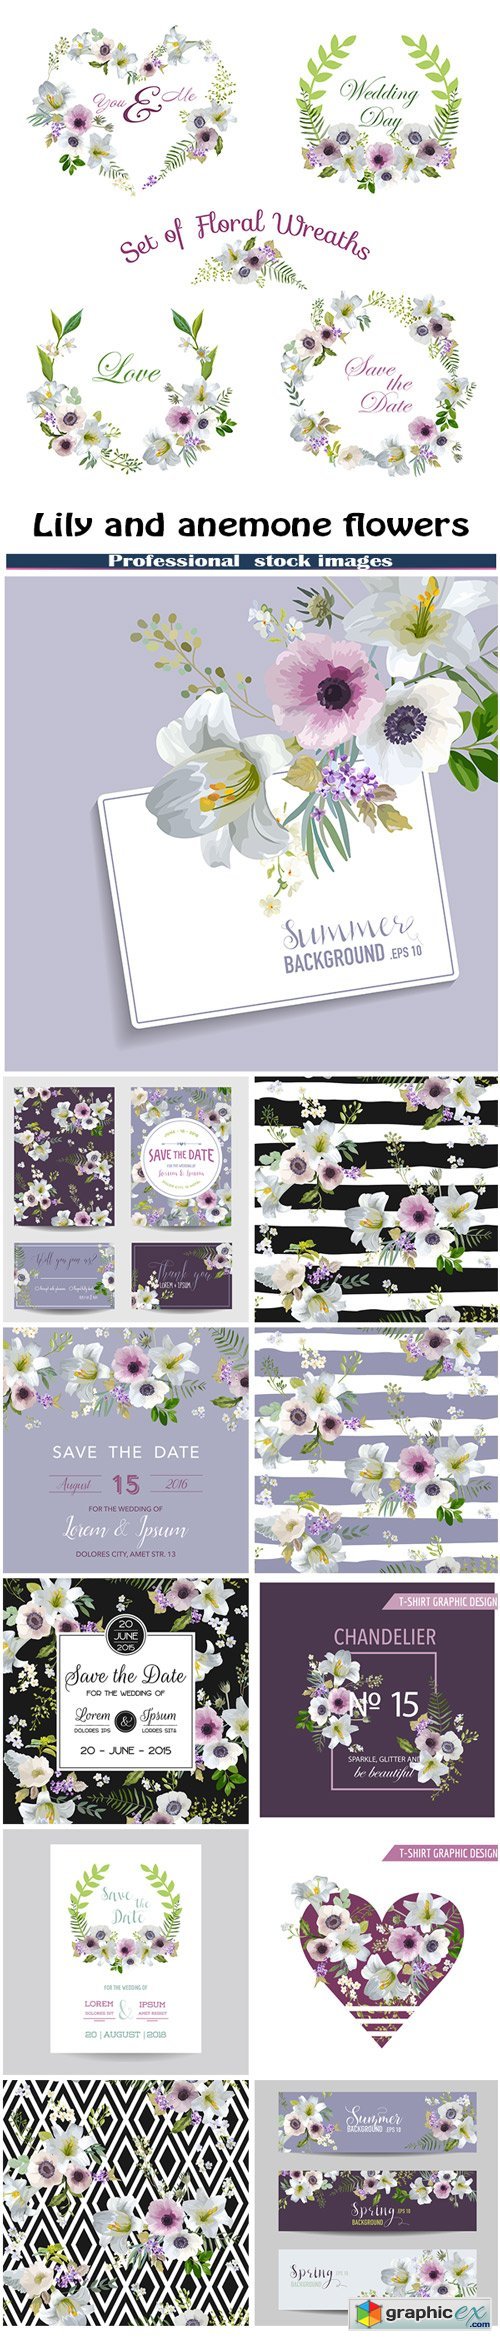 Vintage lily and anemone flowers background